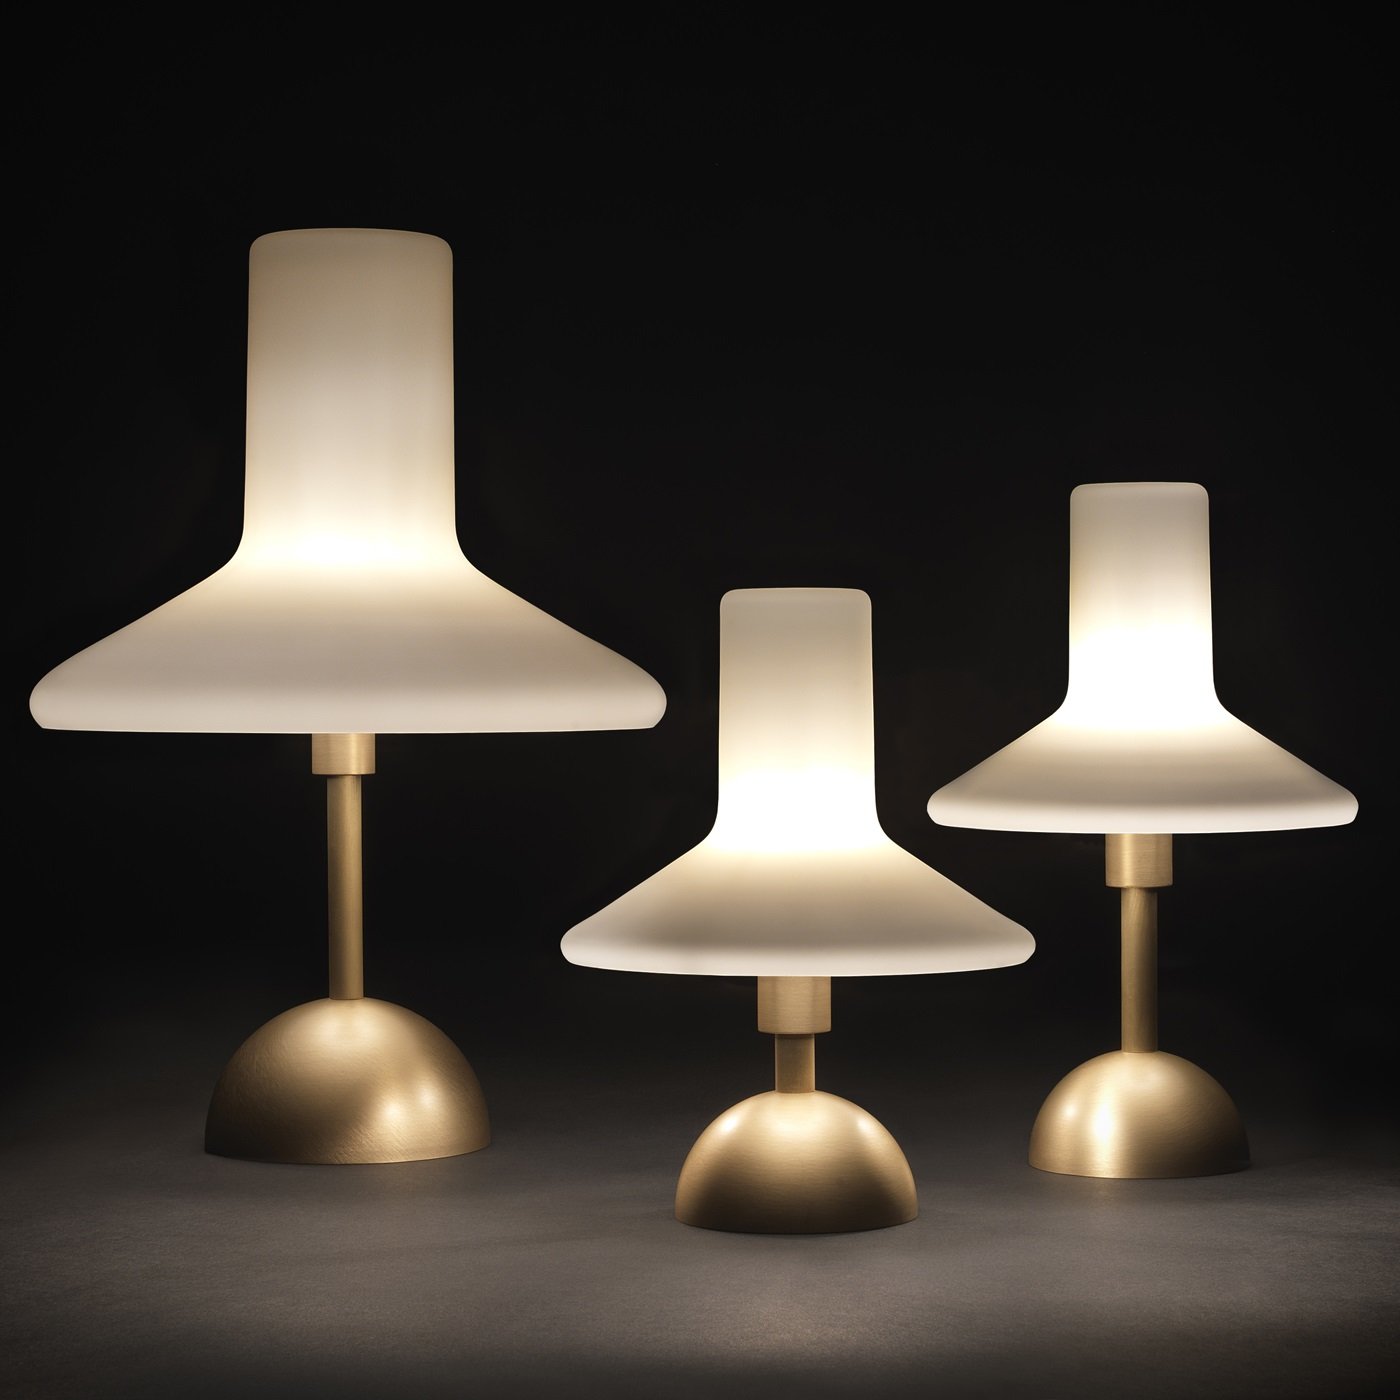 Olly Bronze Small Table Lamp - Alternative view 2